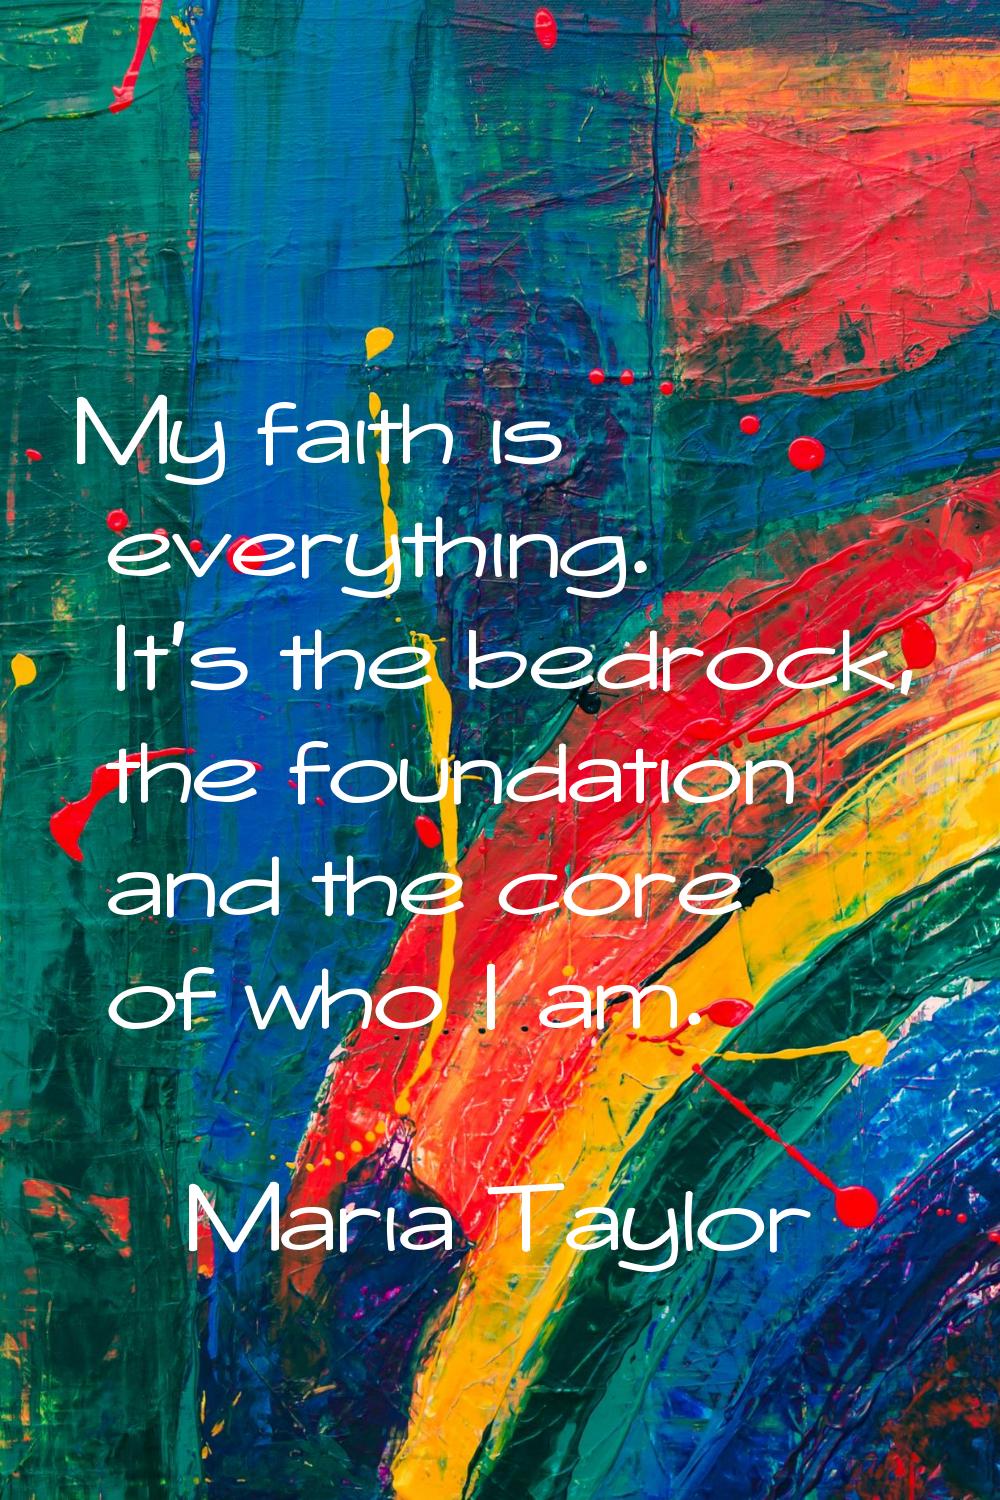 My faith is everything. It’s the bedrock, the foundation and the core of who I am.